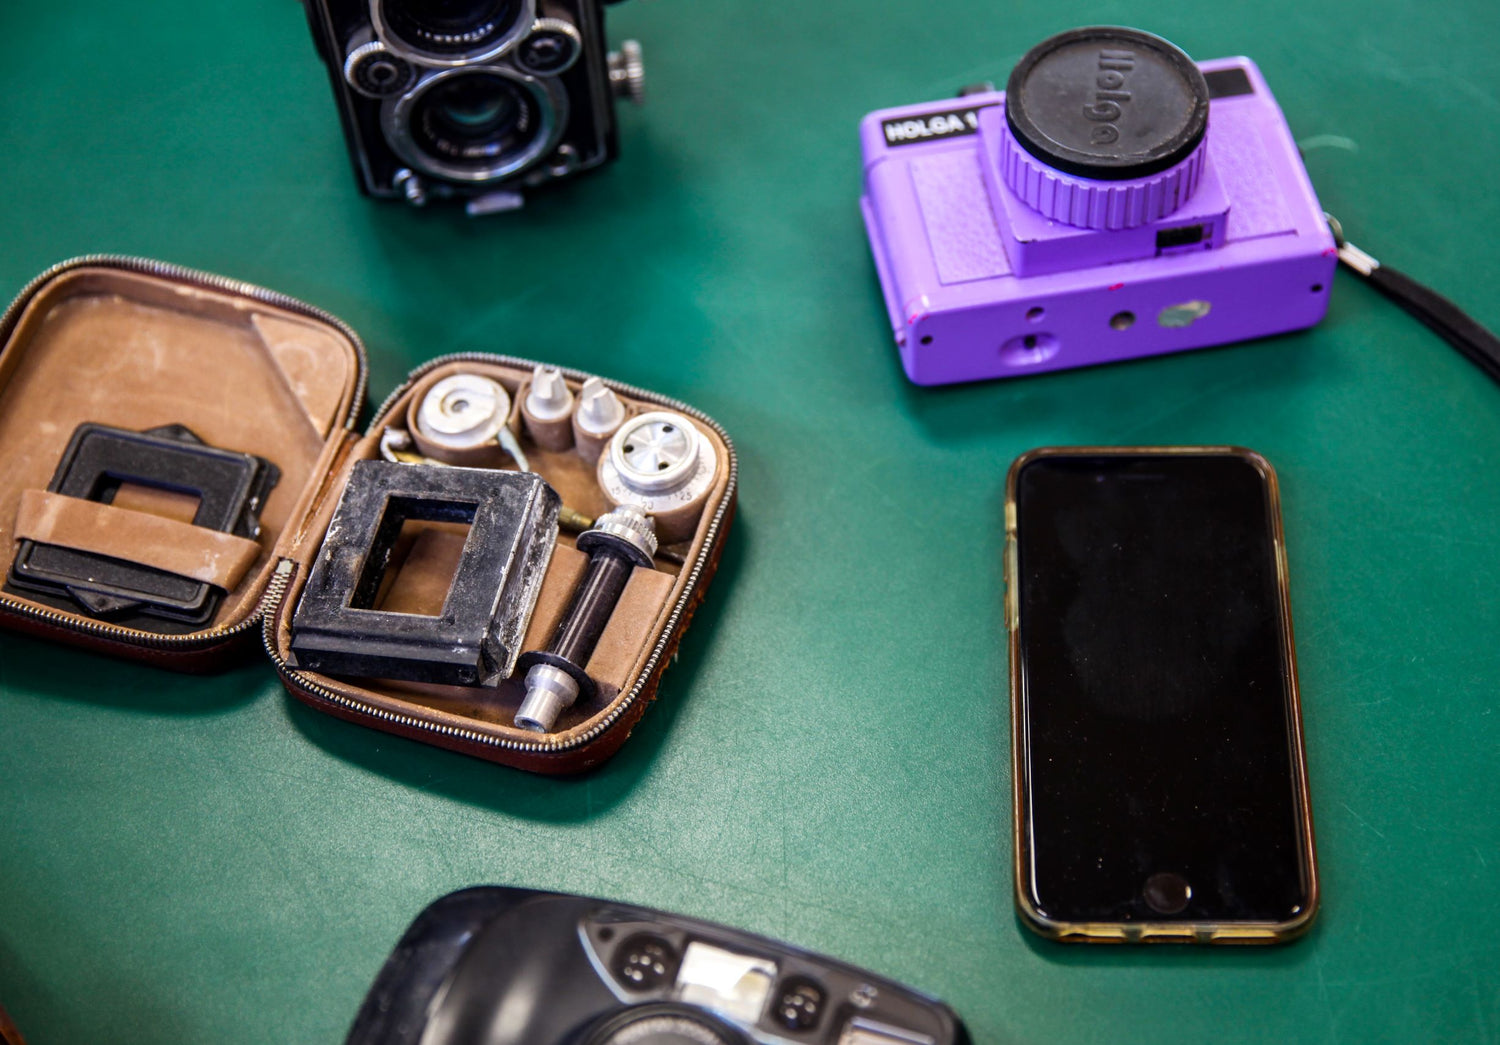 On a dark green surface sit five different types of camera. In the top right corner is a bright purple HOLGA camera with a smartphone below it. At the top and bottom left are two different black film cameras, and between them is an open case with parts for a film camera inside. 